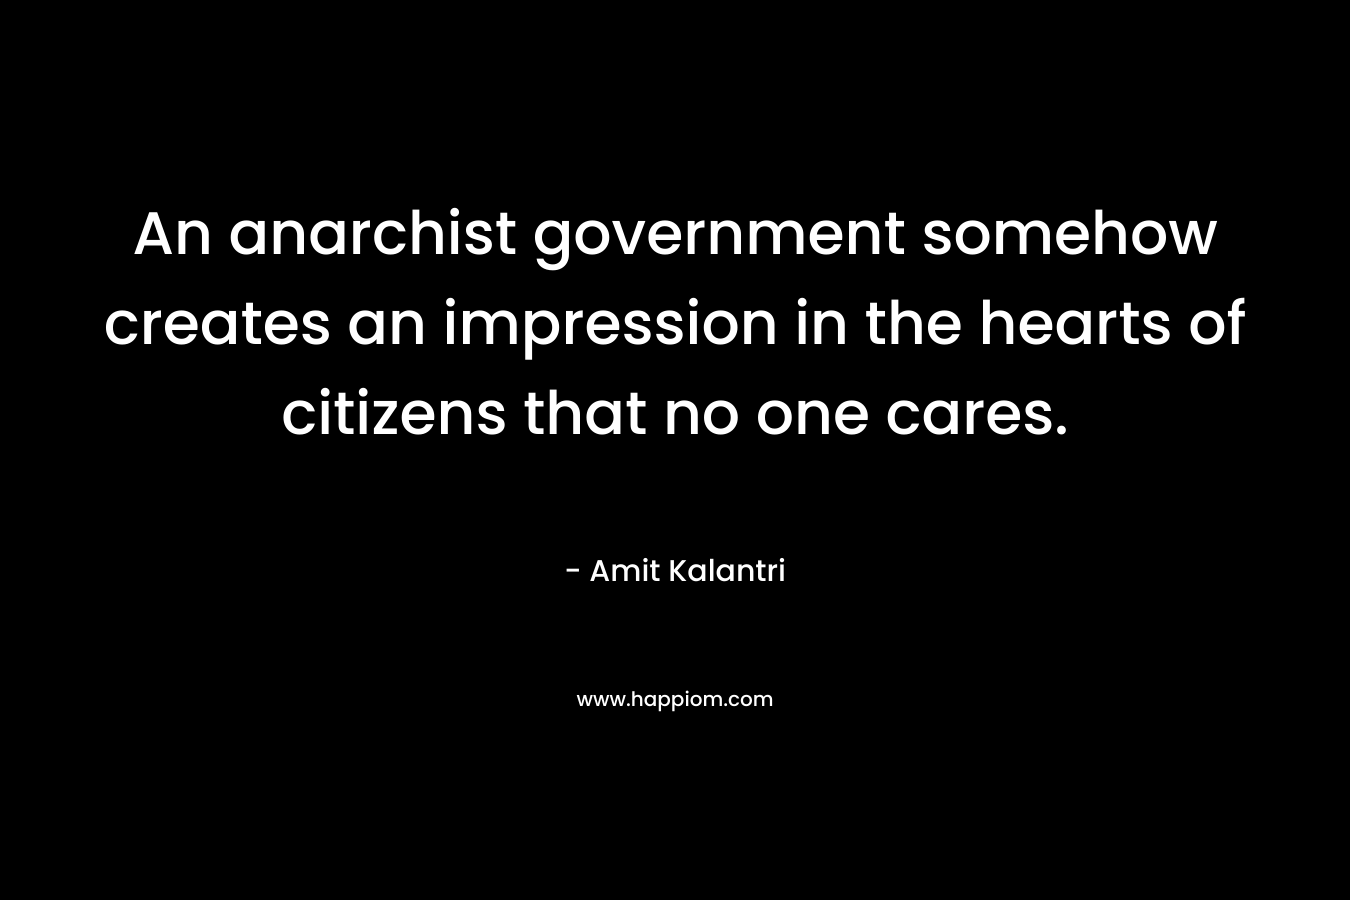 An anarchist government somehow creates an impression in the hearts of citizens that no one cares.